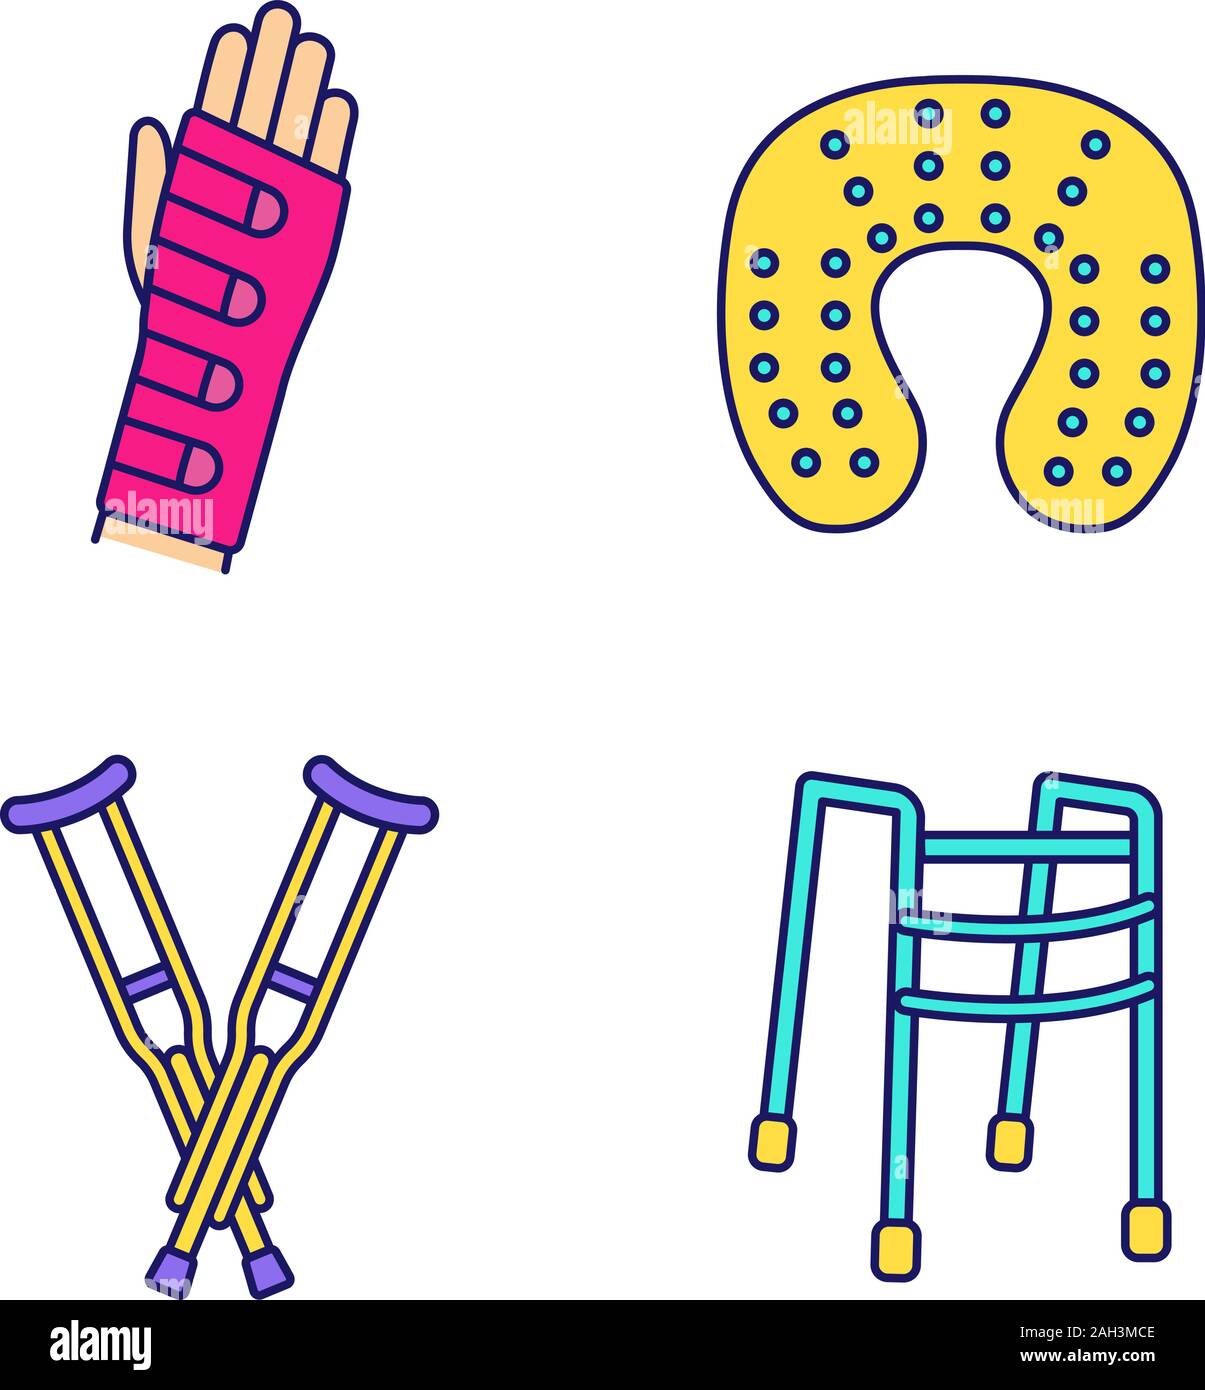 Trauma treatment color icons set. Wrist brace, neck pillow, axillary crutches, walker. Isolated vector illustrations Stock Vector